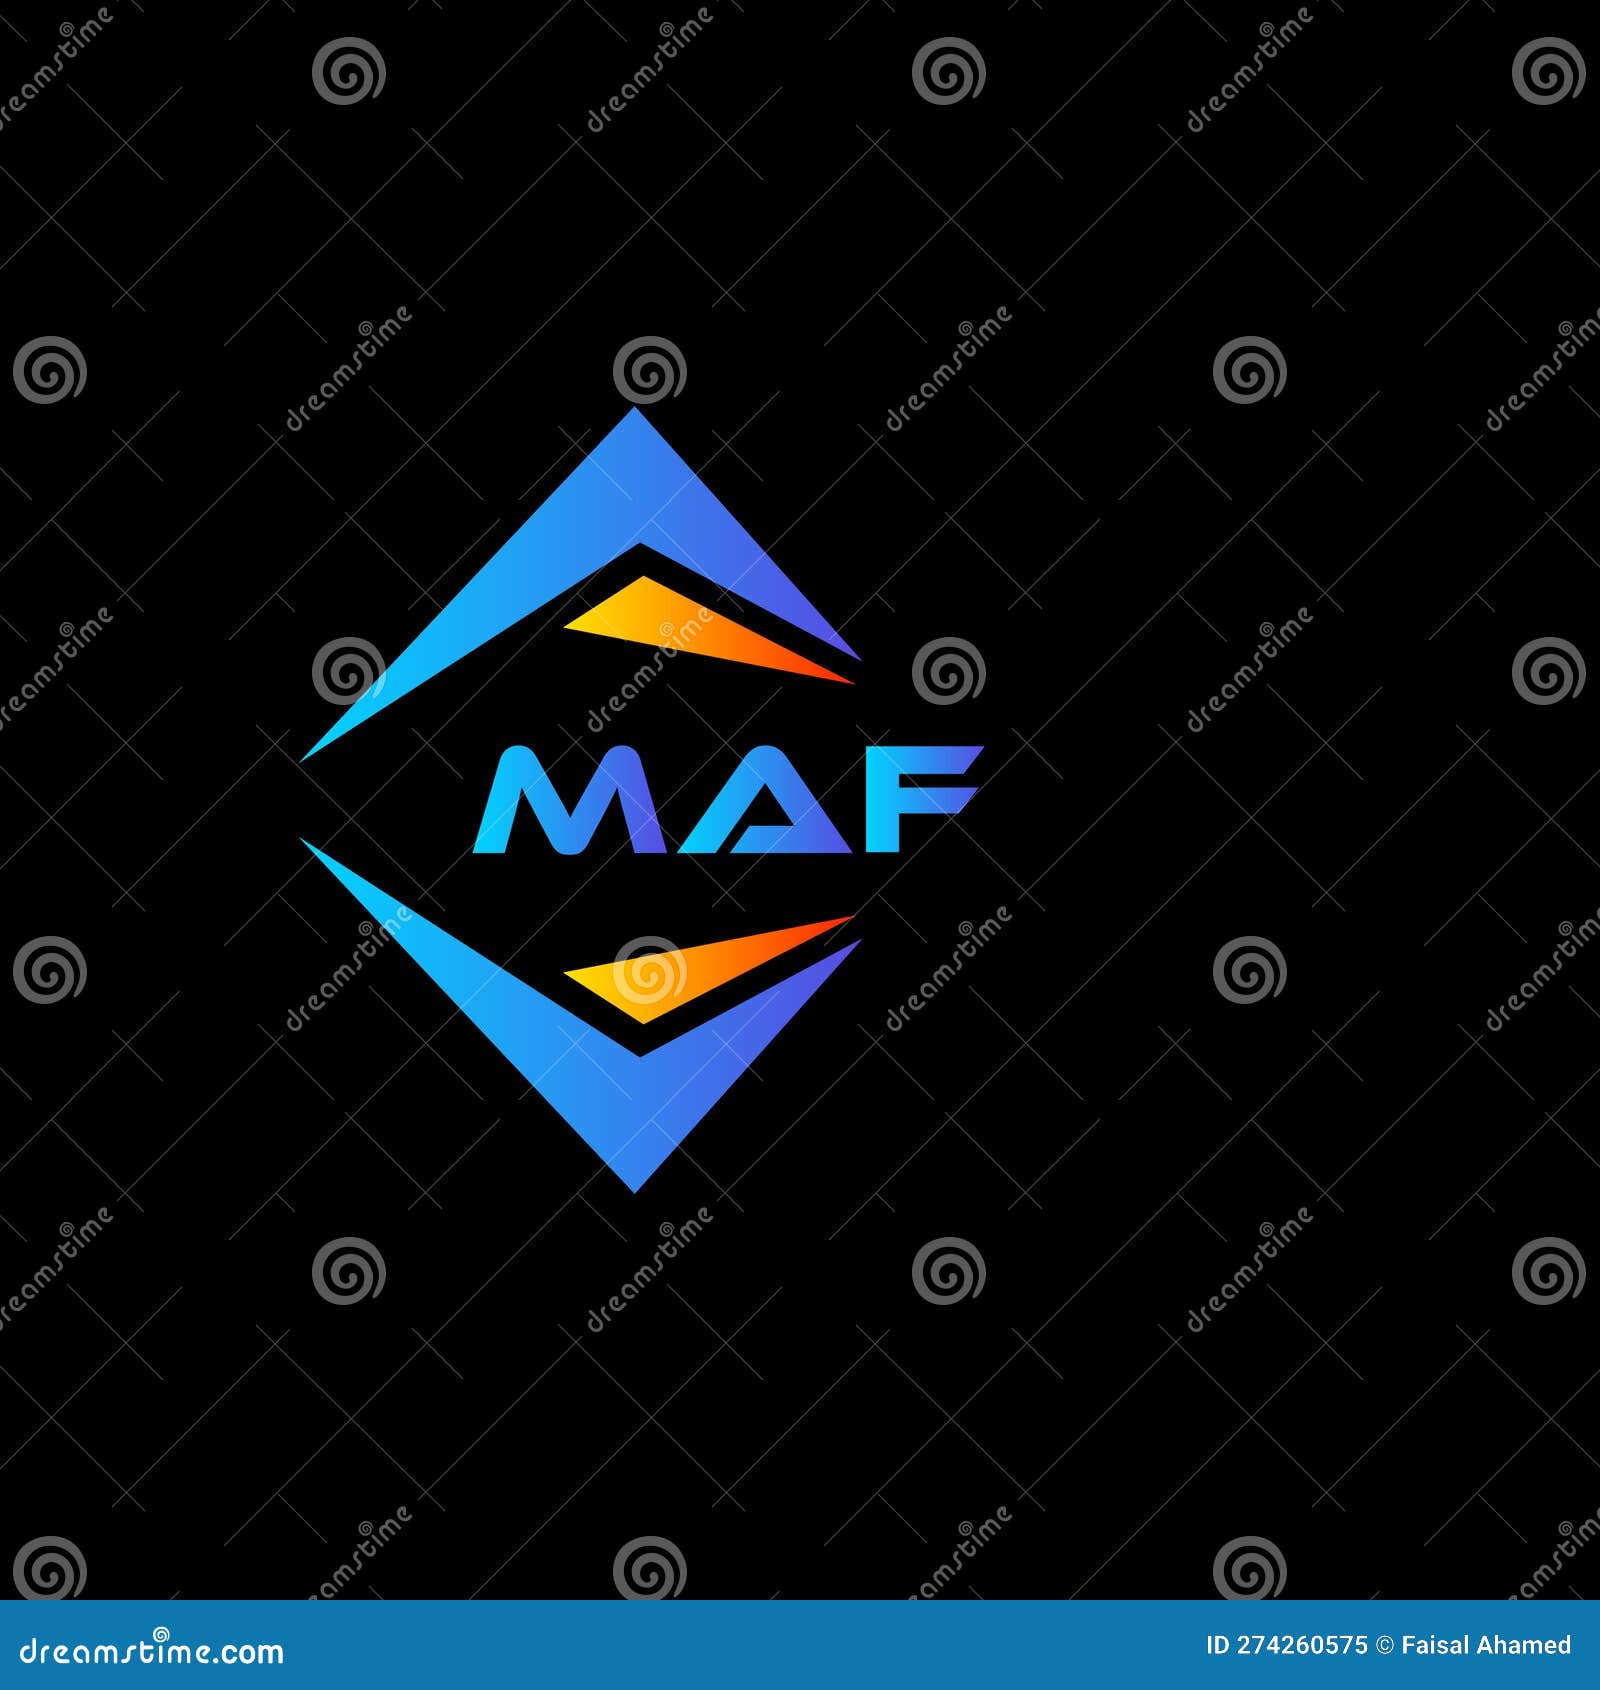 maf abstract technology logo  on black background. maf creative initials letter logo concept